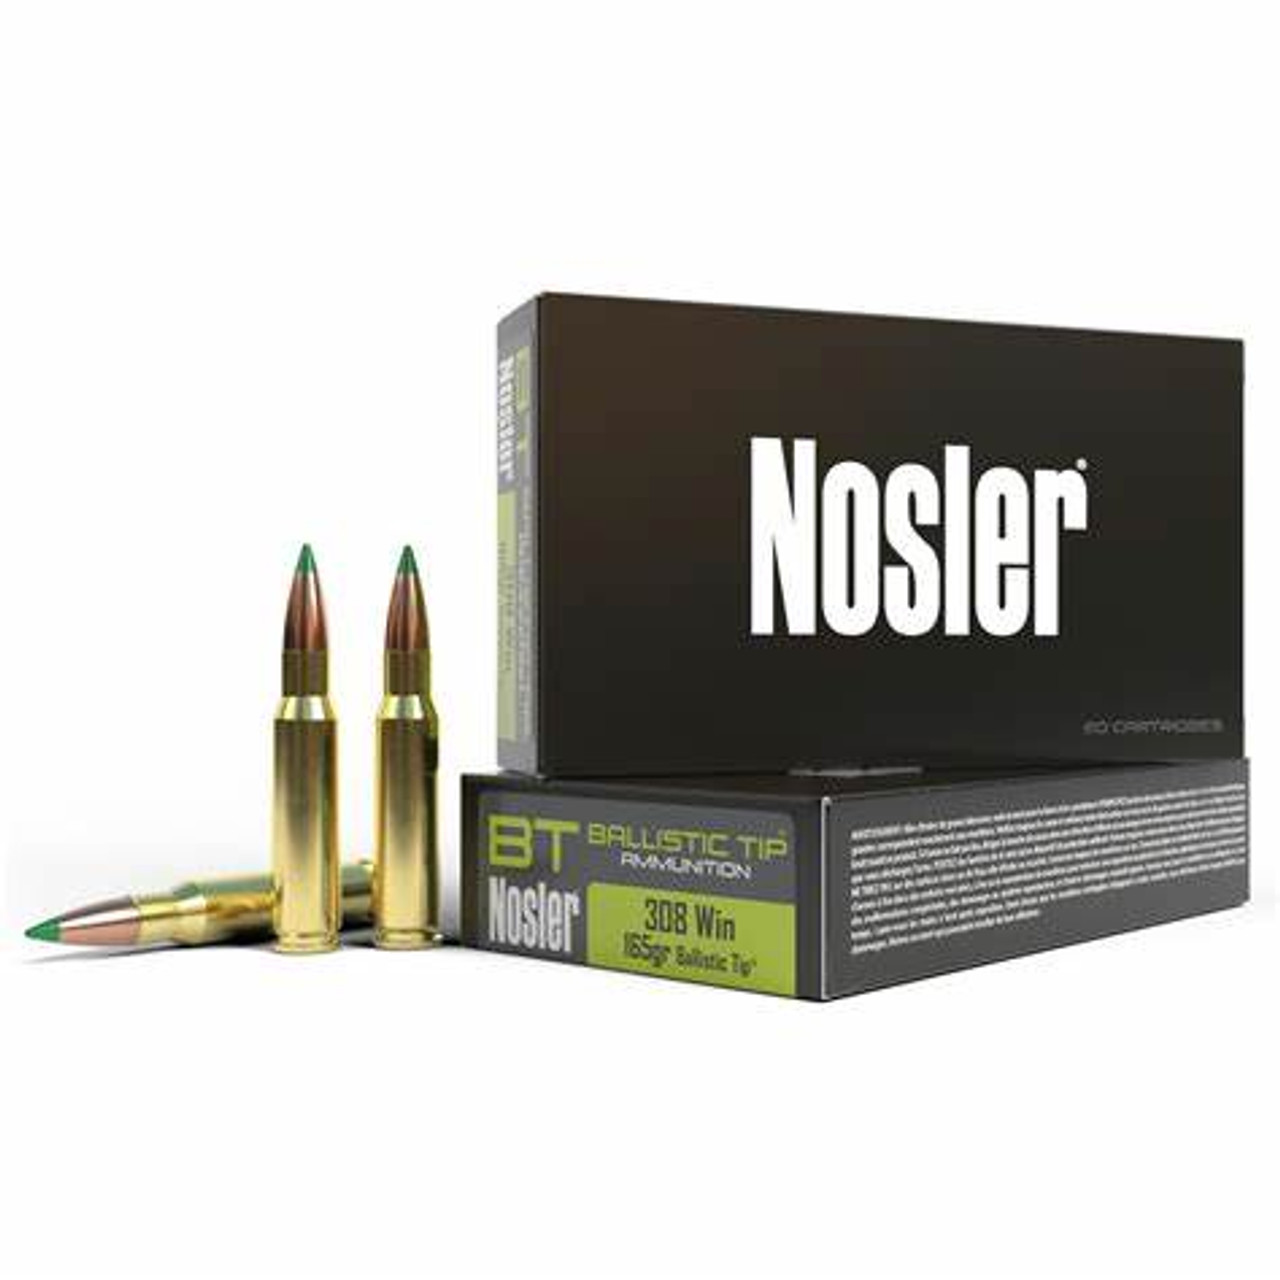 DESCRIPTION
BT (BALLISTIC TIP) AMMUNITION
Nosler® Ballistic Tip® ammunition is loaded up front with the accurate and reliable, Nosler® Ballistic Tip® Bullet.  Every bullet weight and muzzle velocity is optimized for maximum effectiveness on Deer, Antelope, and Hogs.

Bullet Information

Over 30 years of continual improvement, design refinement, and manufacturing expertise make the Ballistic Tip® Hunting Bullet, the best choice for America’s most popular game.

Tapered bullet jacket controls expansion for the ideal balance of penetration and energy transfer.
Proven track-record of accuracy and game-killing terminal performance.
Specifications:

Caliber: .308 Winchester
Bullet Weight:  165 grain
Bullet Style:  Nosler Ballistic Tip
Count:  20
Lead Free:  No